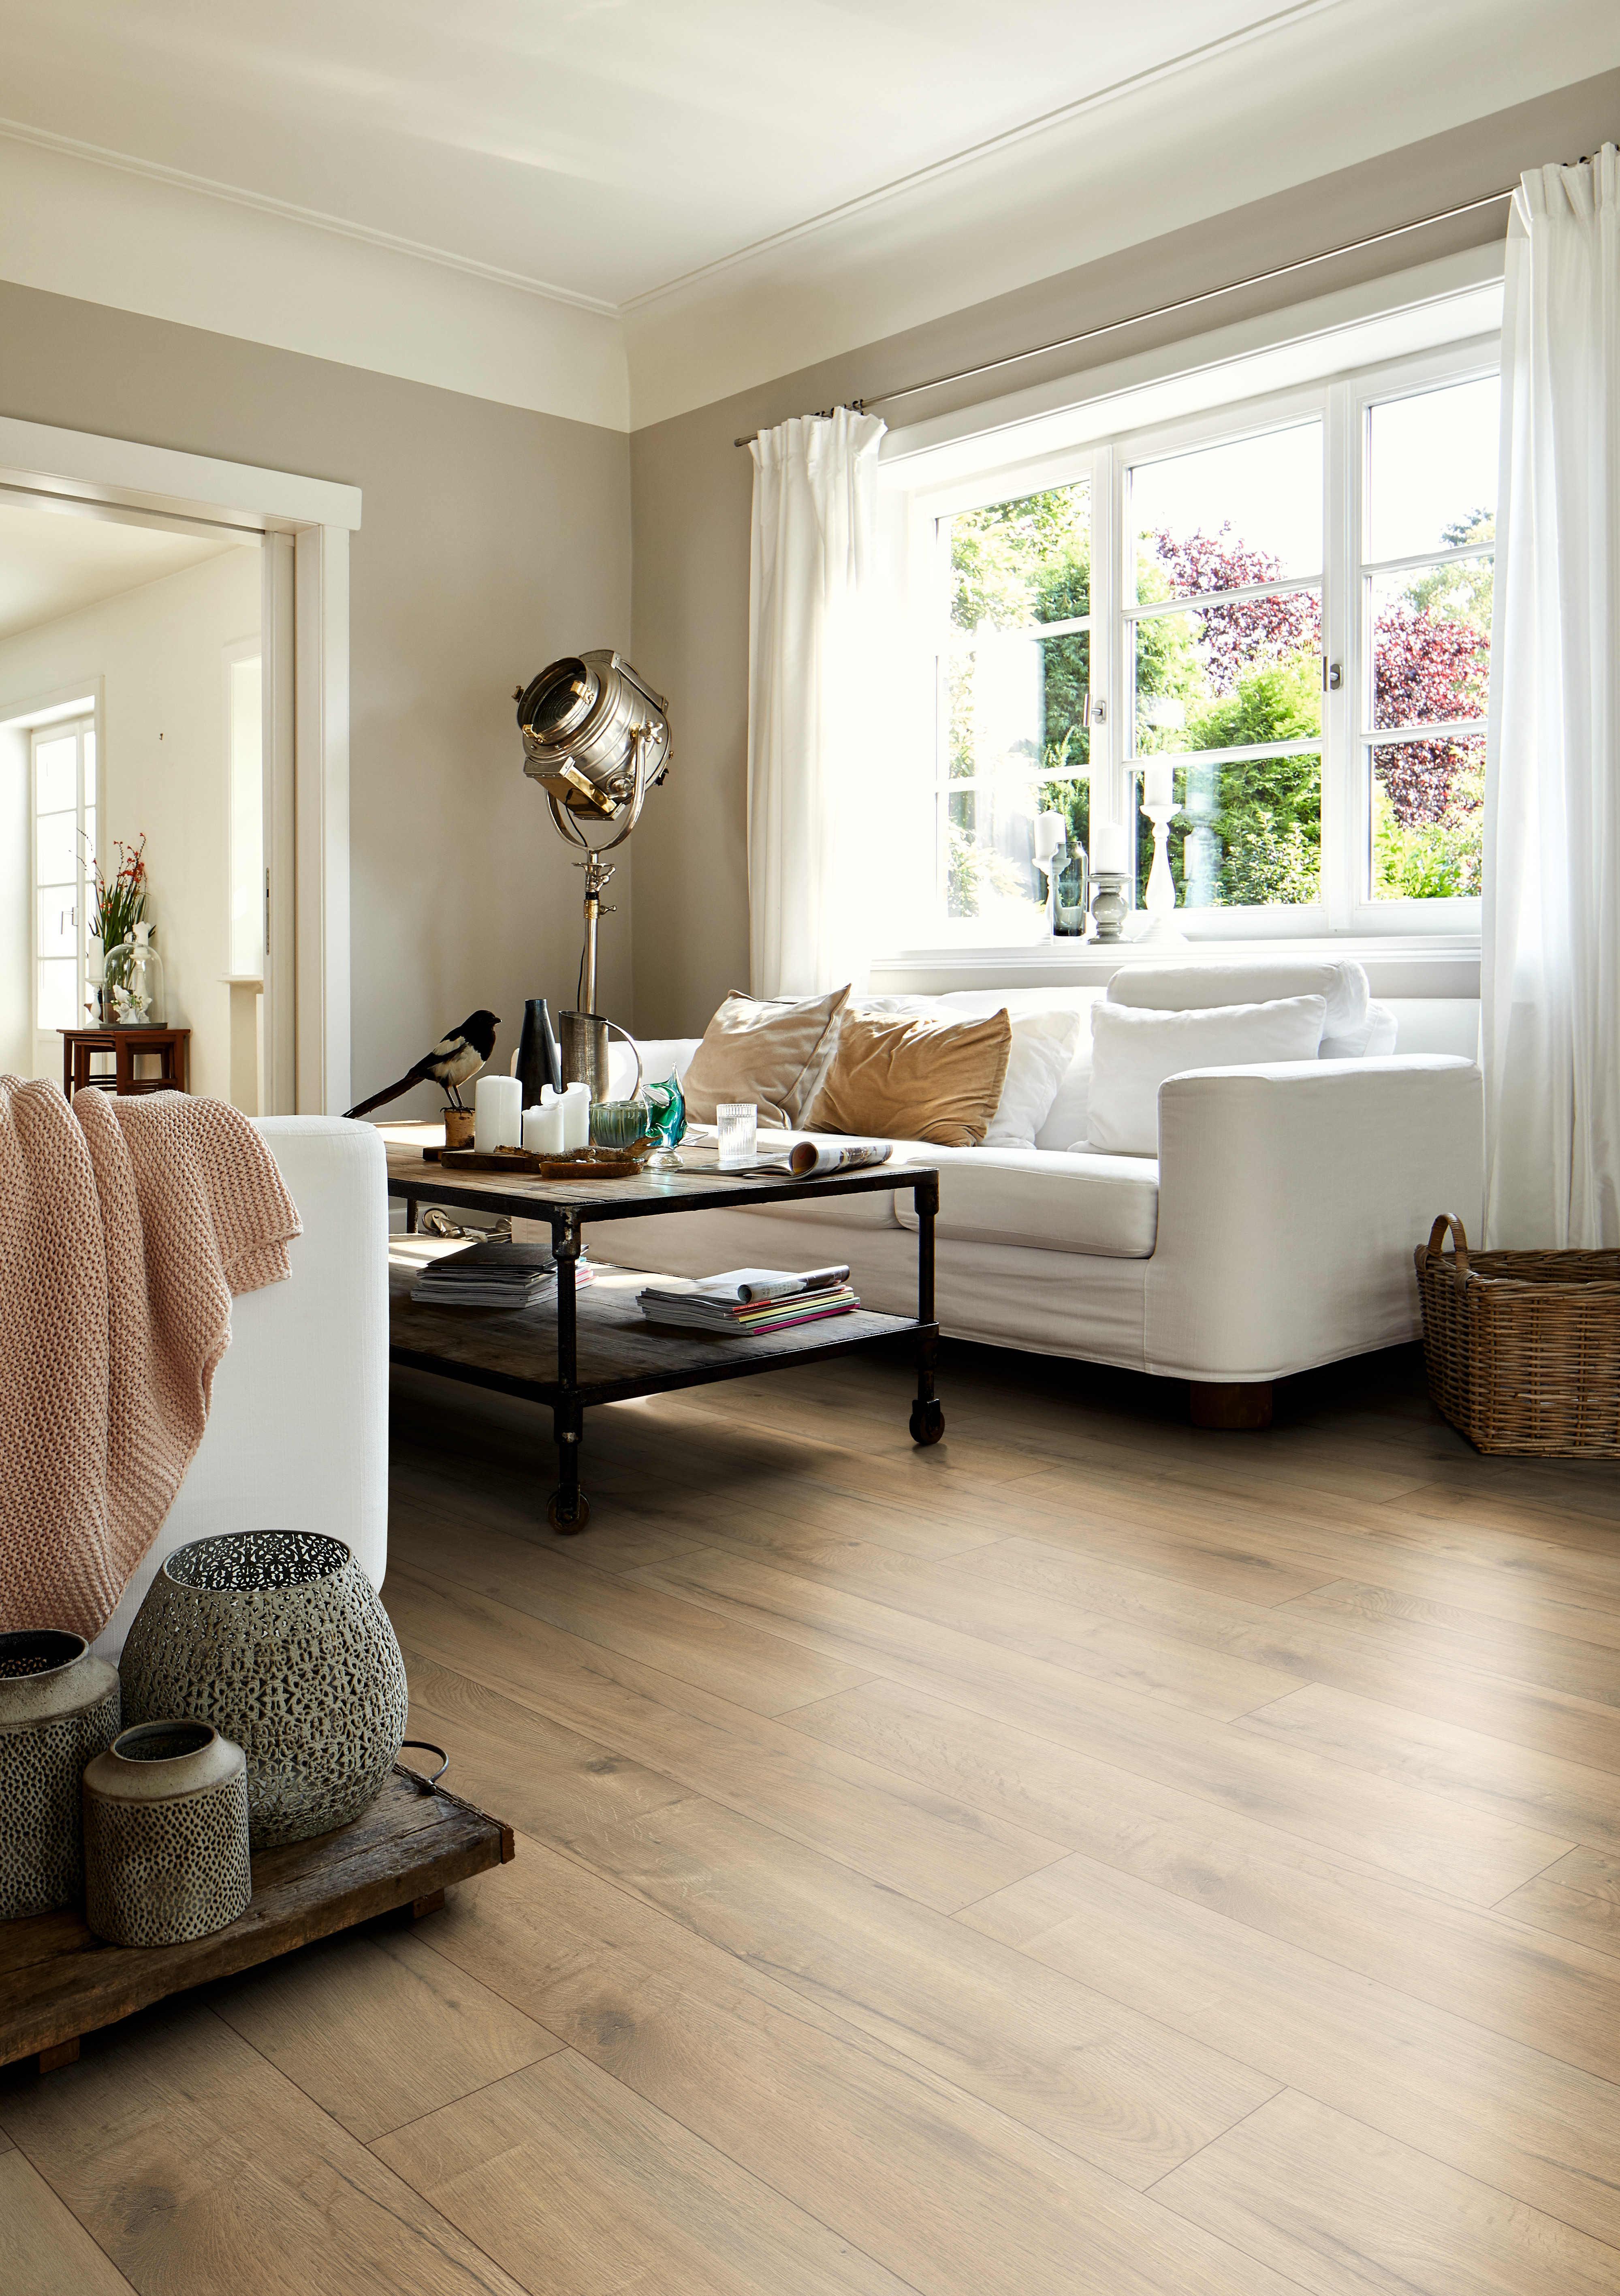 With the HOME you install flooring yourself